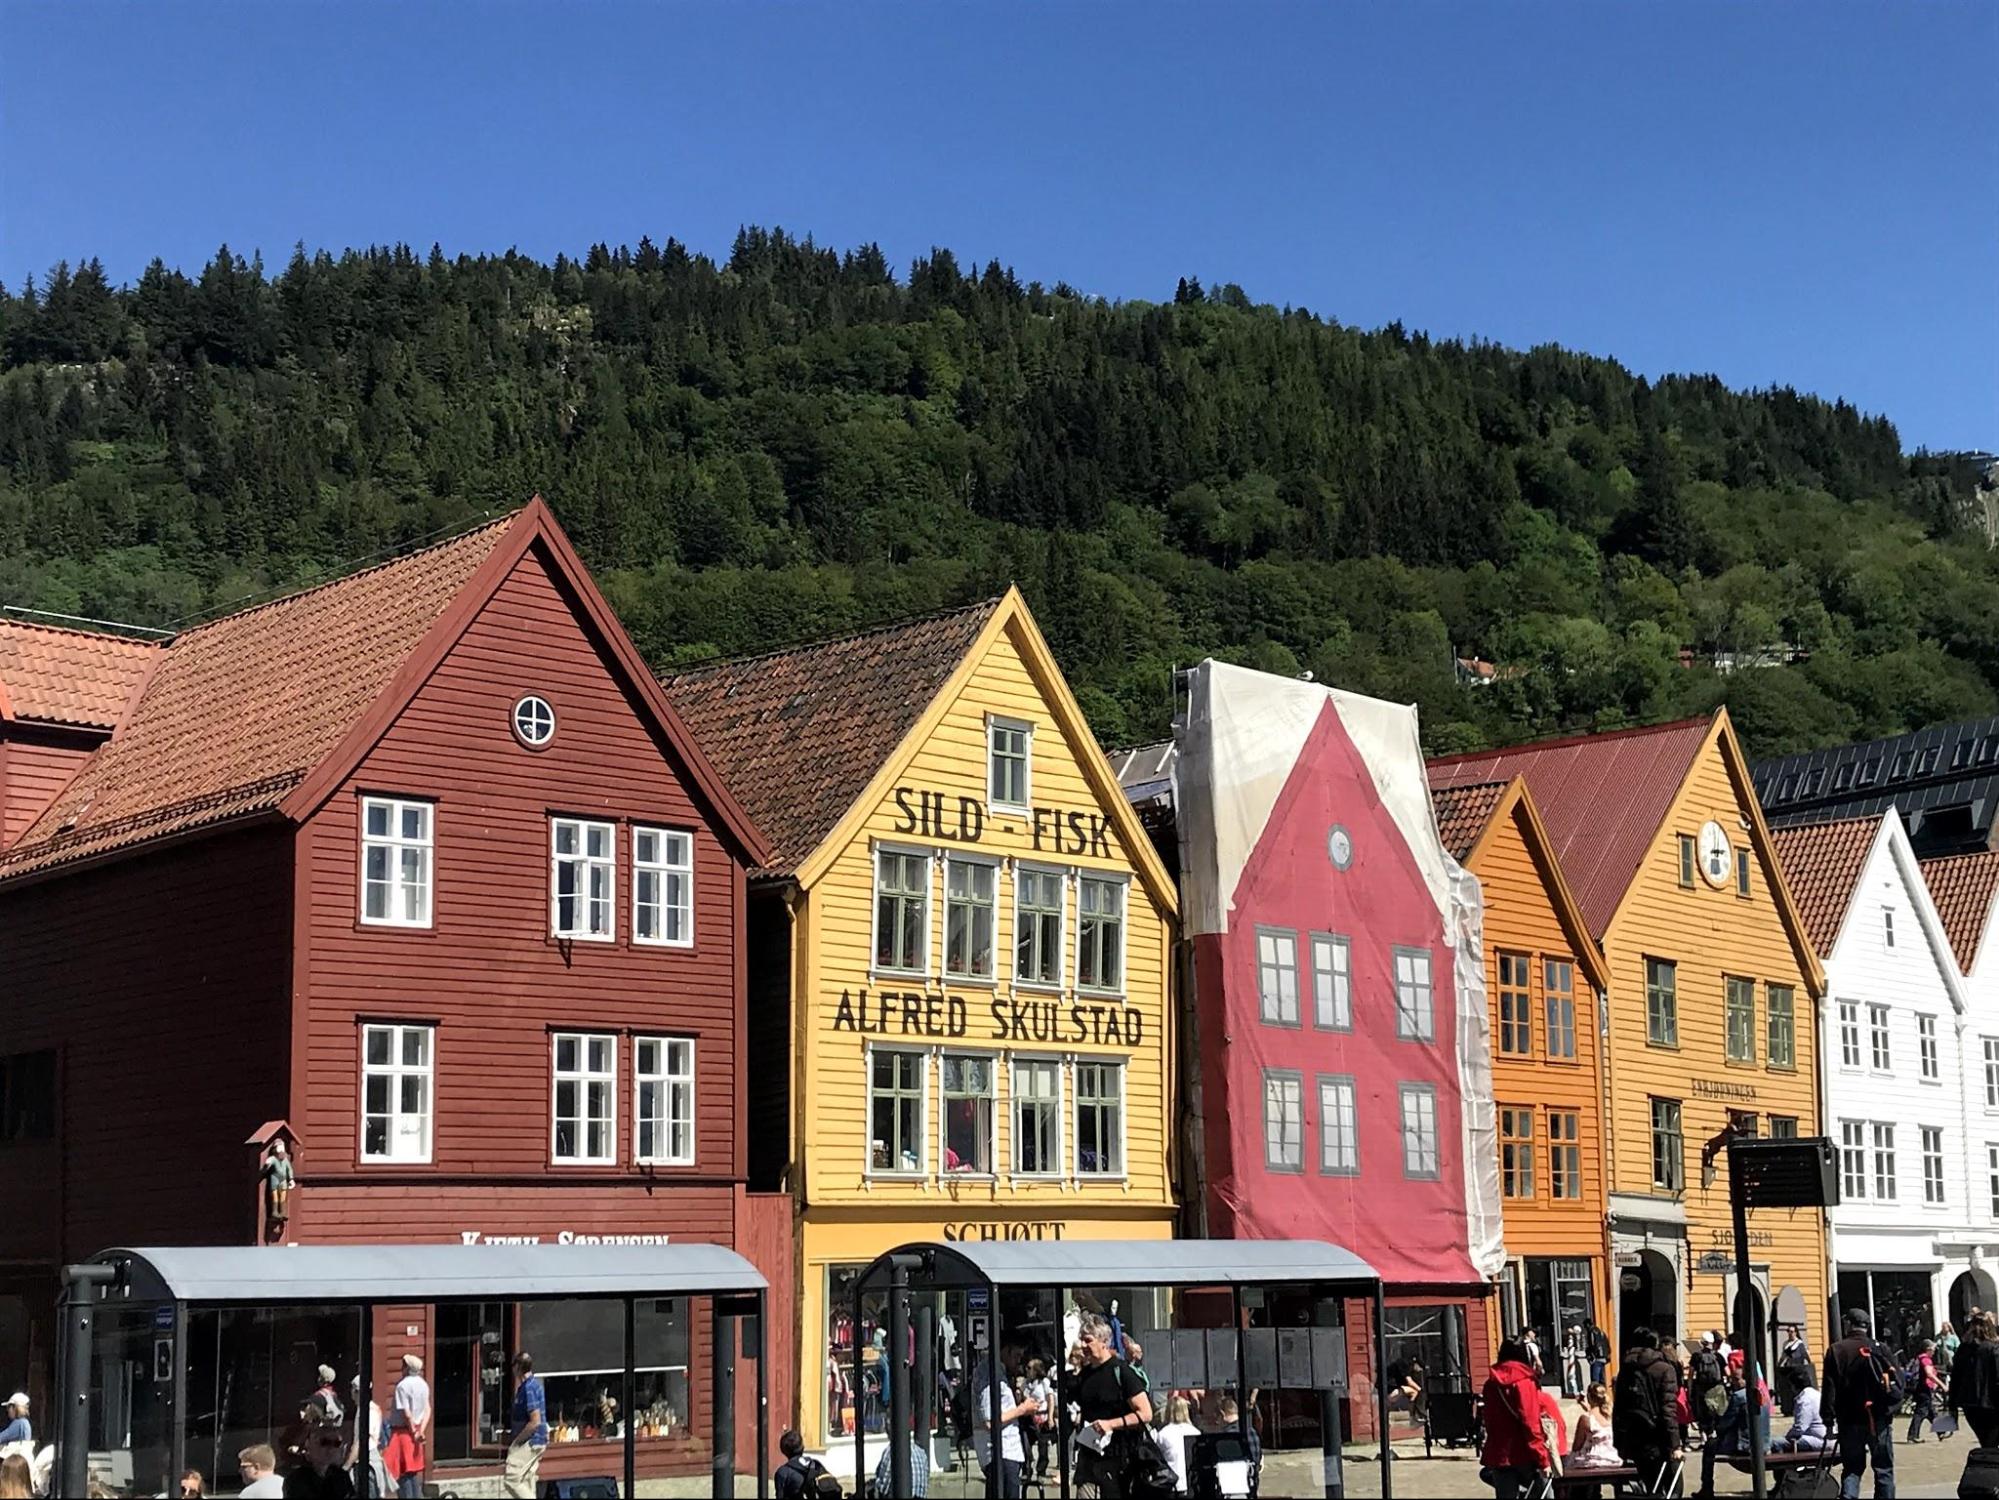 On the road again, we stopped off in Bergen to see the area known as Bryggen